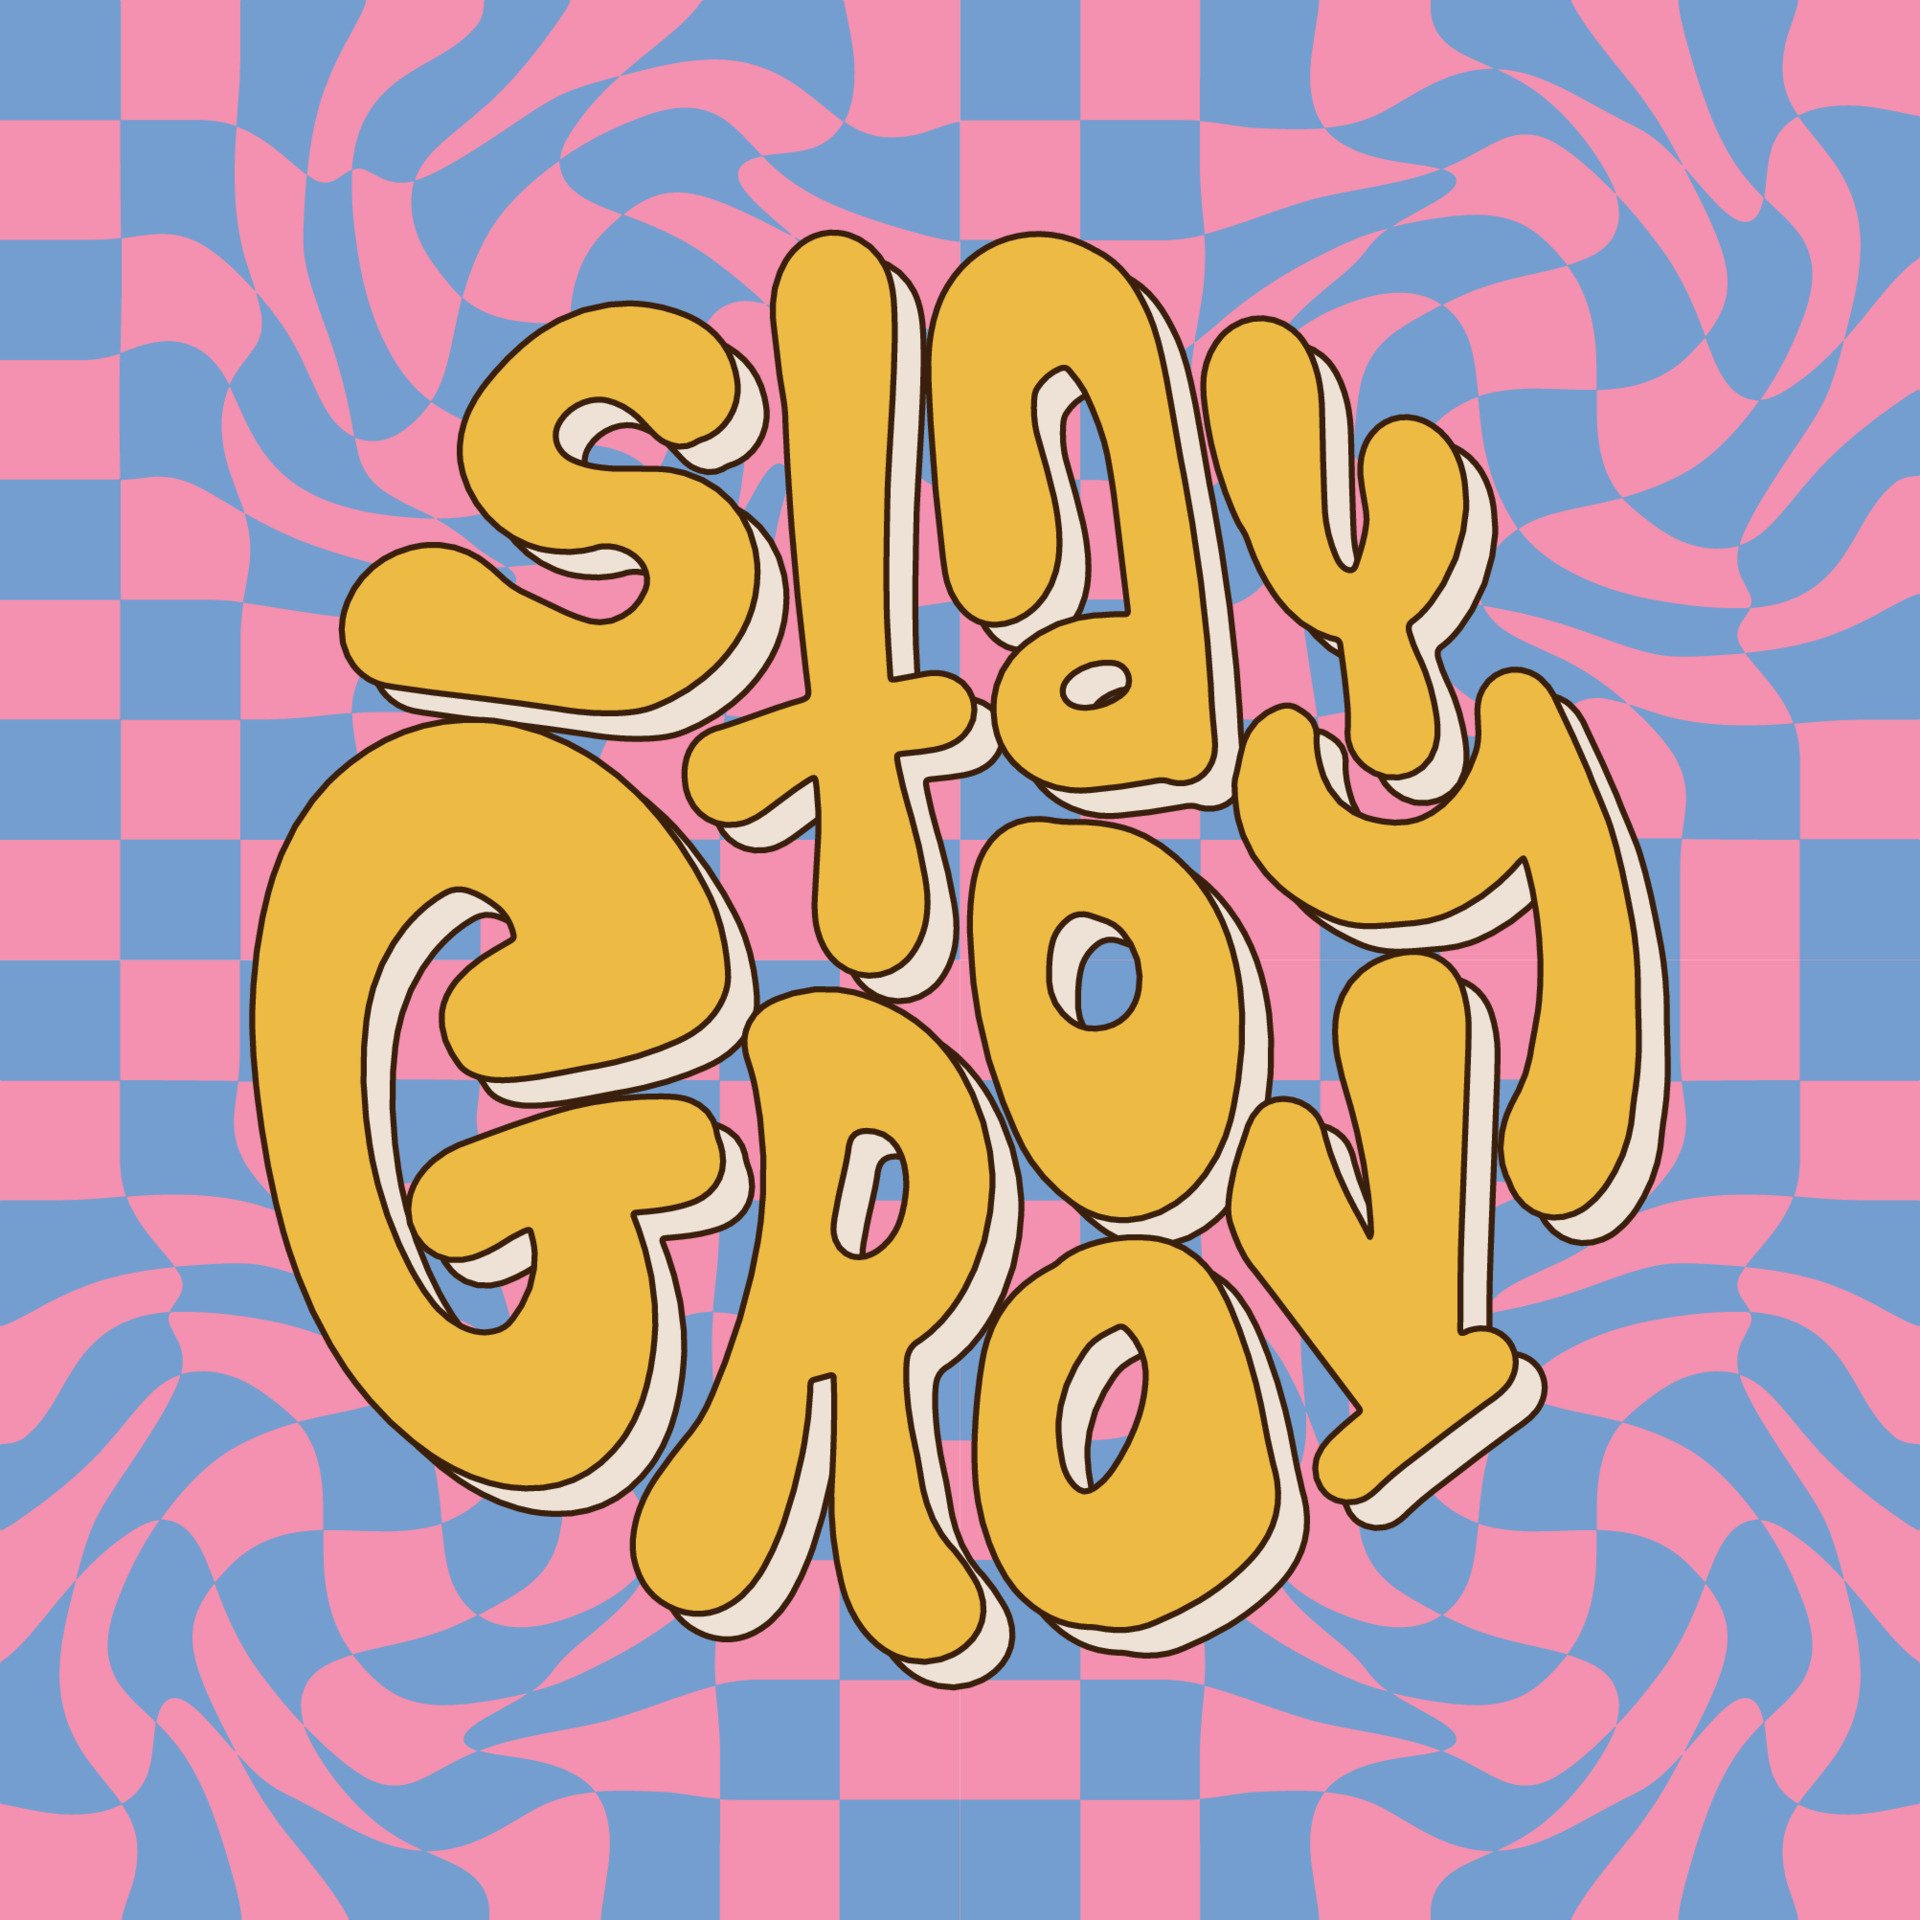 Stay groovy retro lettering slogan with hippie twirl background for tee t shirt or poster sticker. Round shape hand drawn inspirational quote. Vector contour illustration